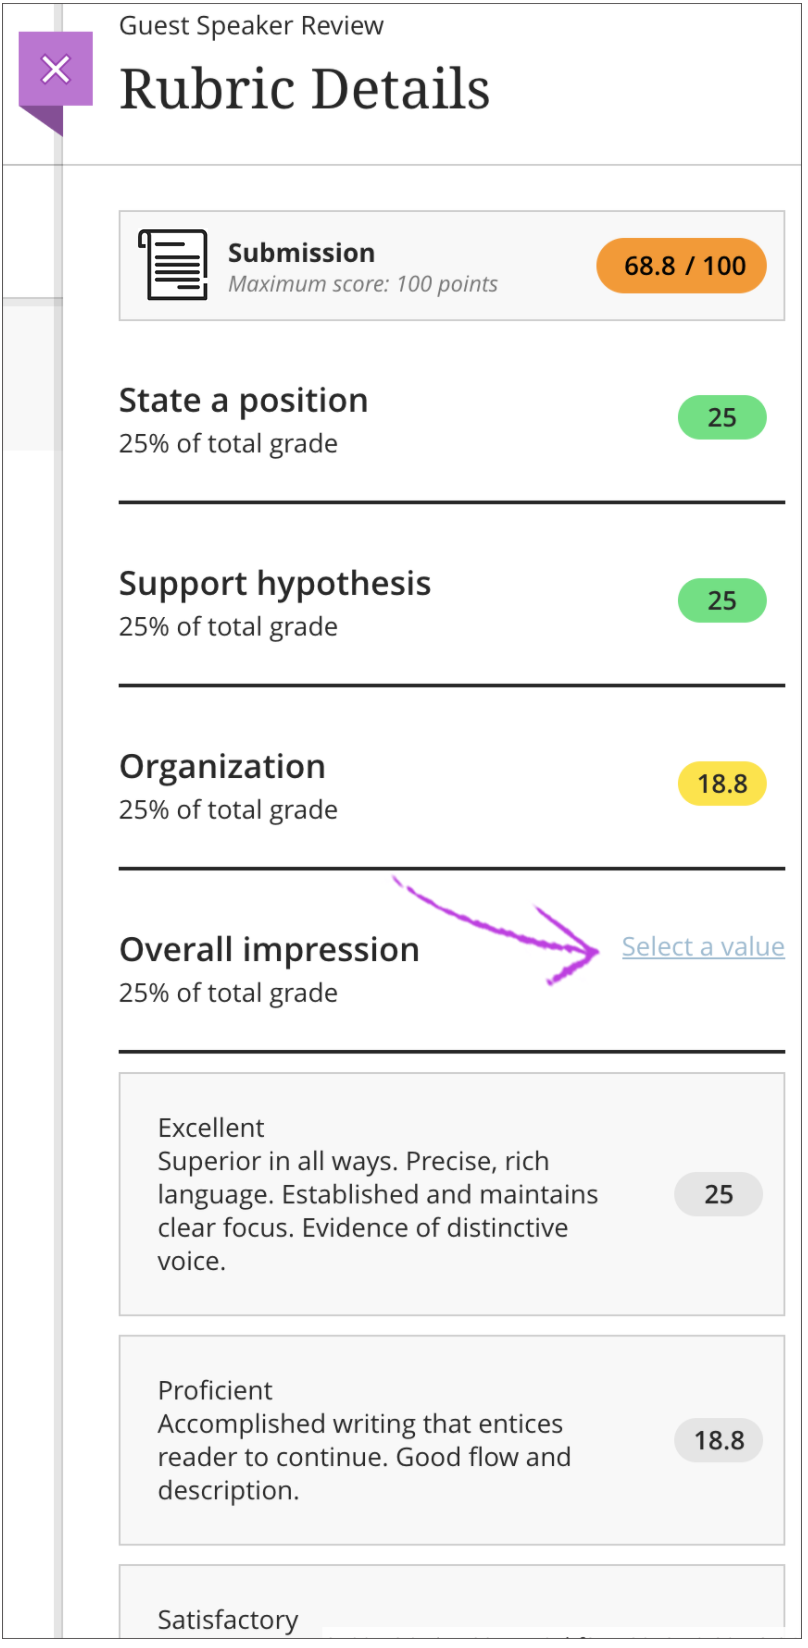 Submission rubric details page with values set